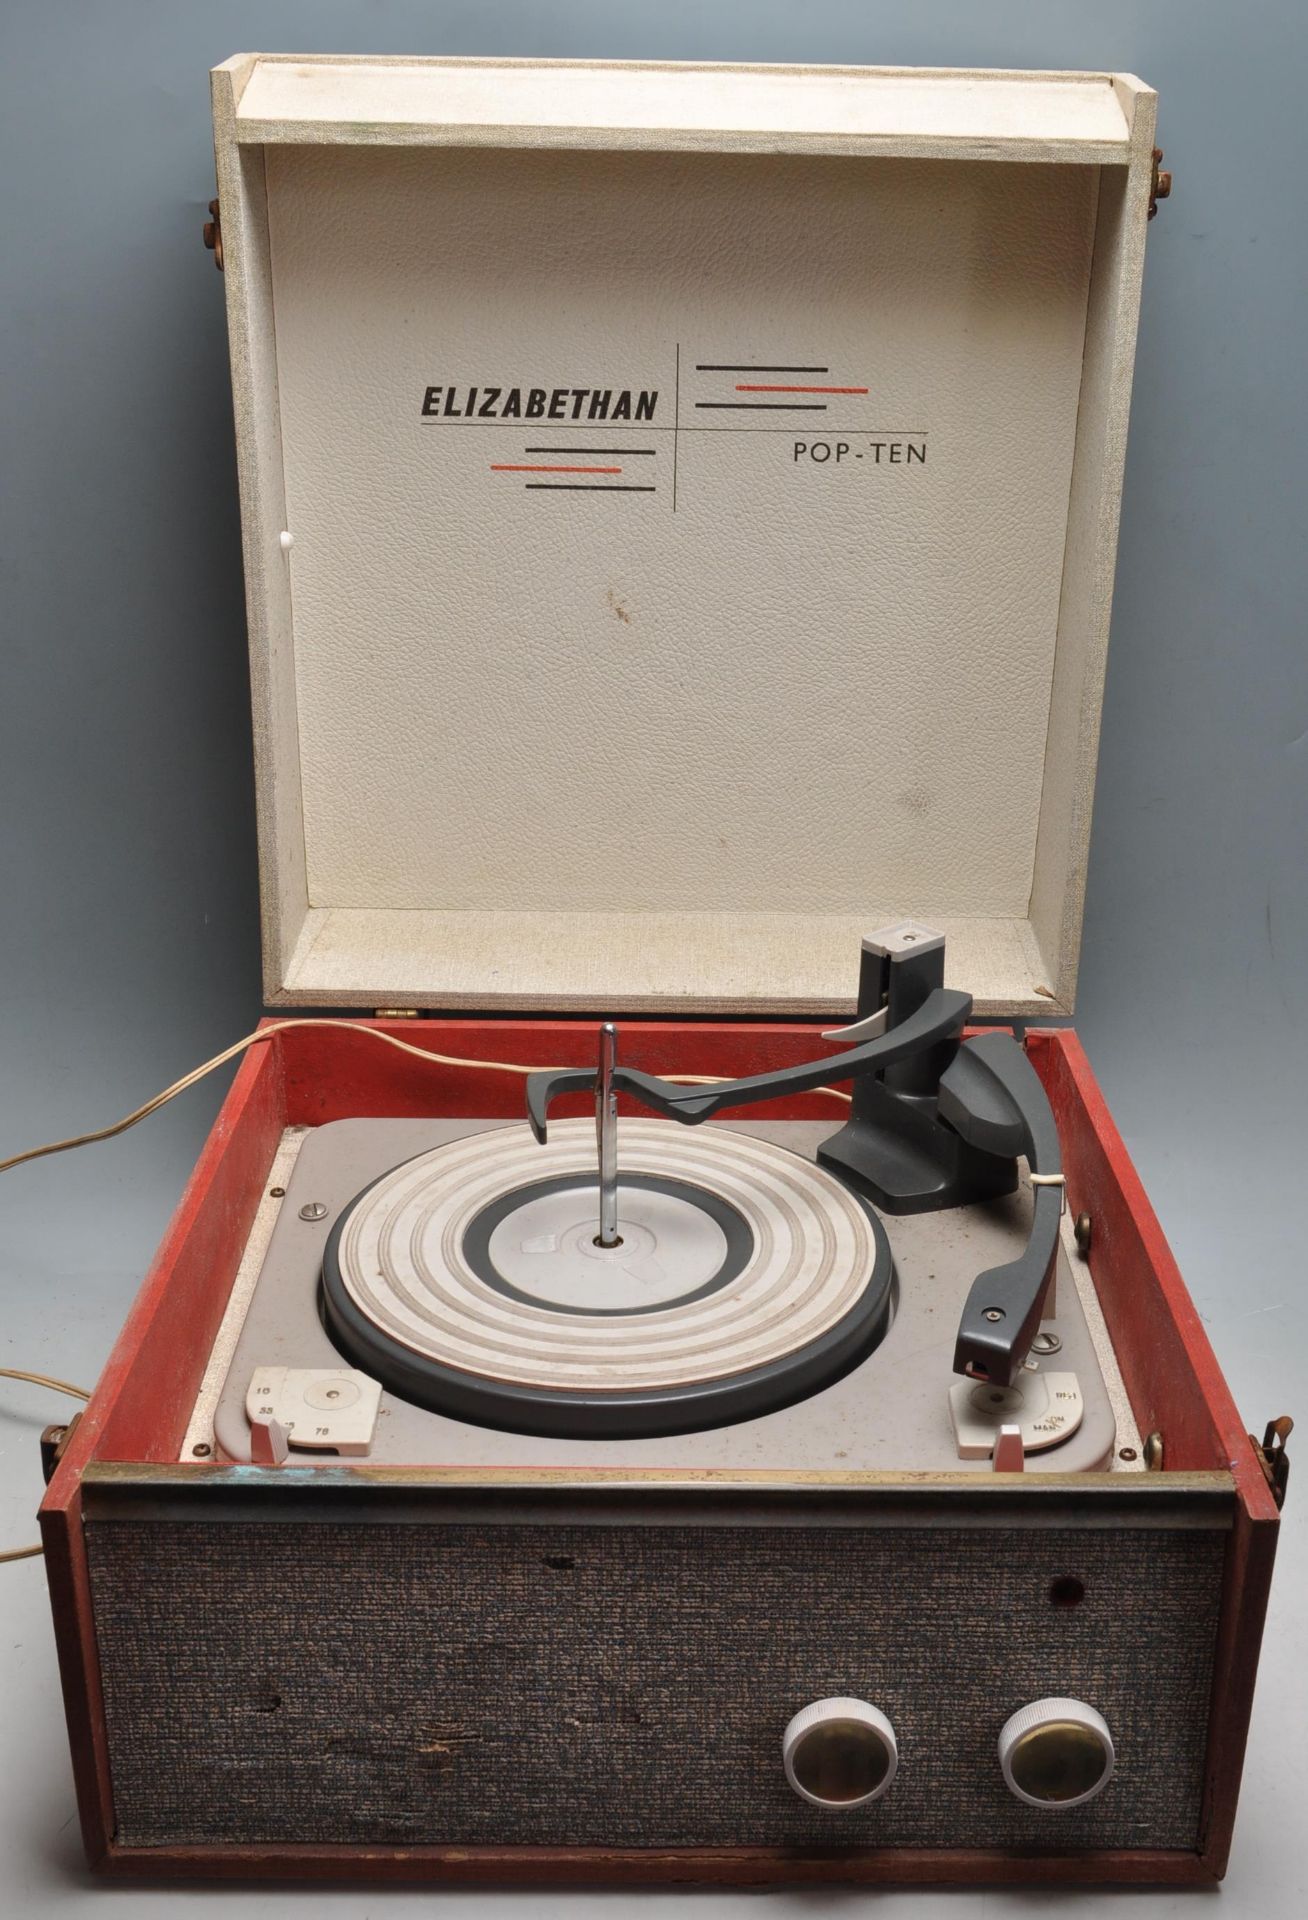 A VINTAGE RETRO ELIZABETHAN POP TEN RECORD PLAYER IN RED AND CREAM